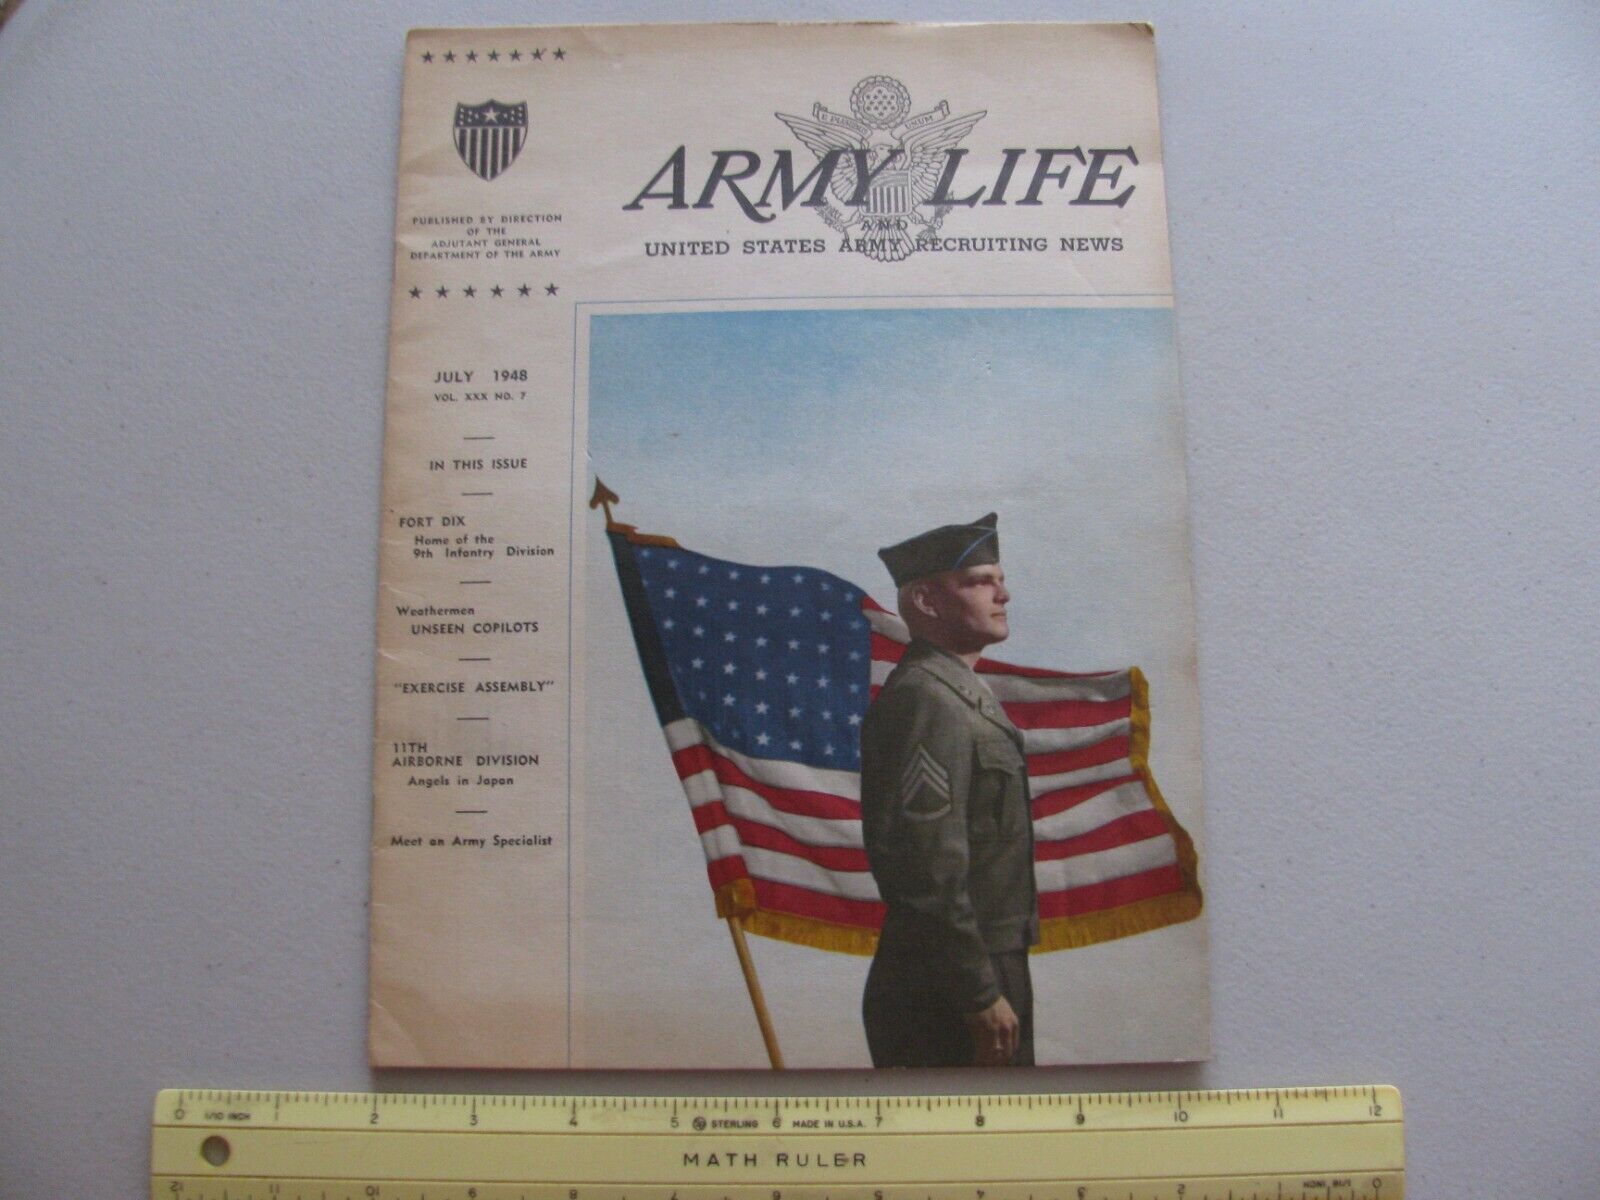 POST WW2 ARMY LIFE RECRUITING NEWS MAGAZINE 11TH AIRBORNE / 9TH INFANTRY RELATED